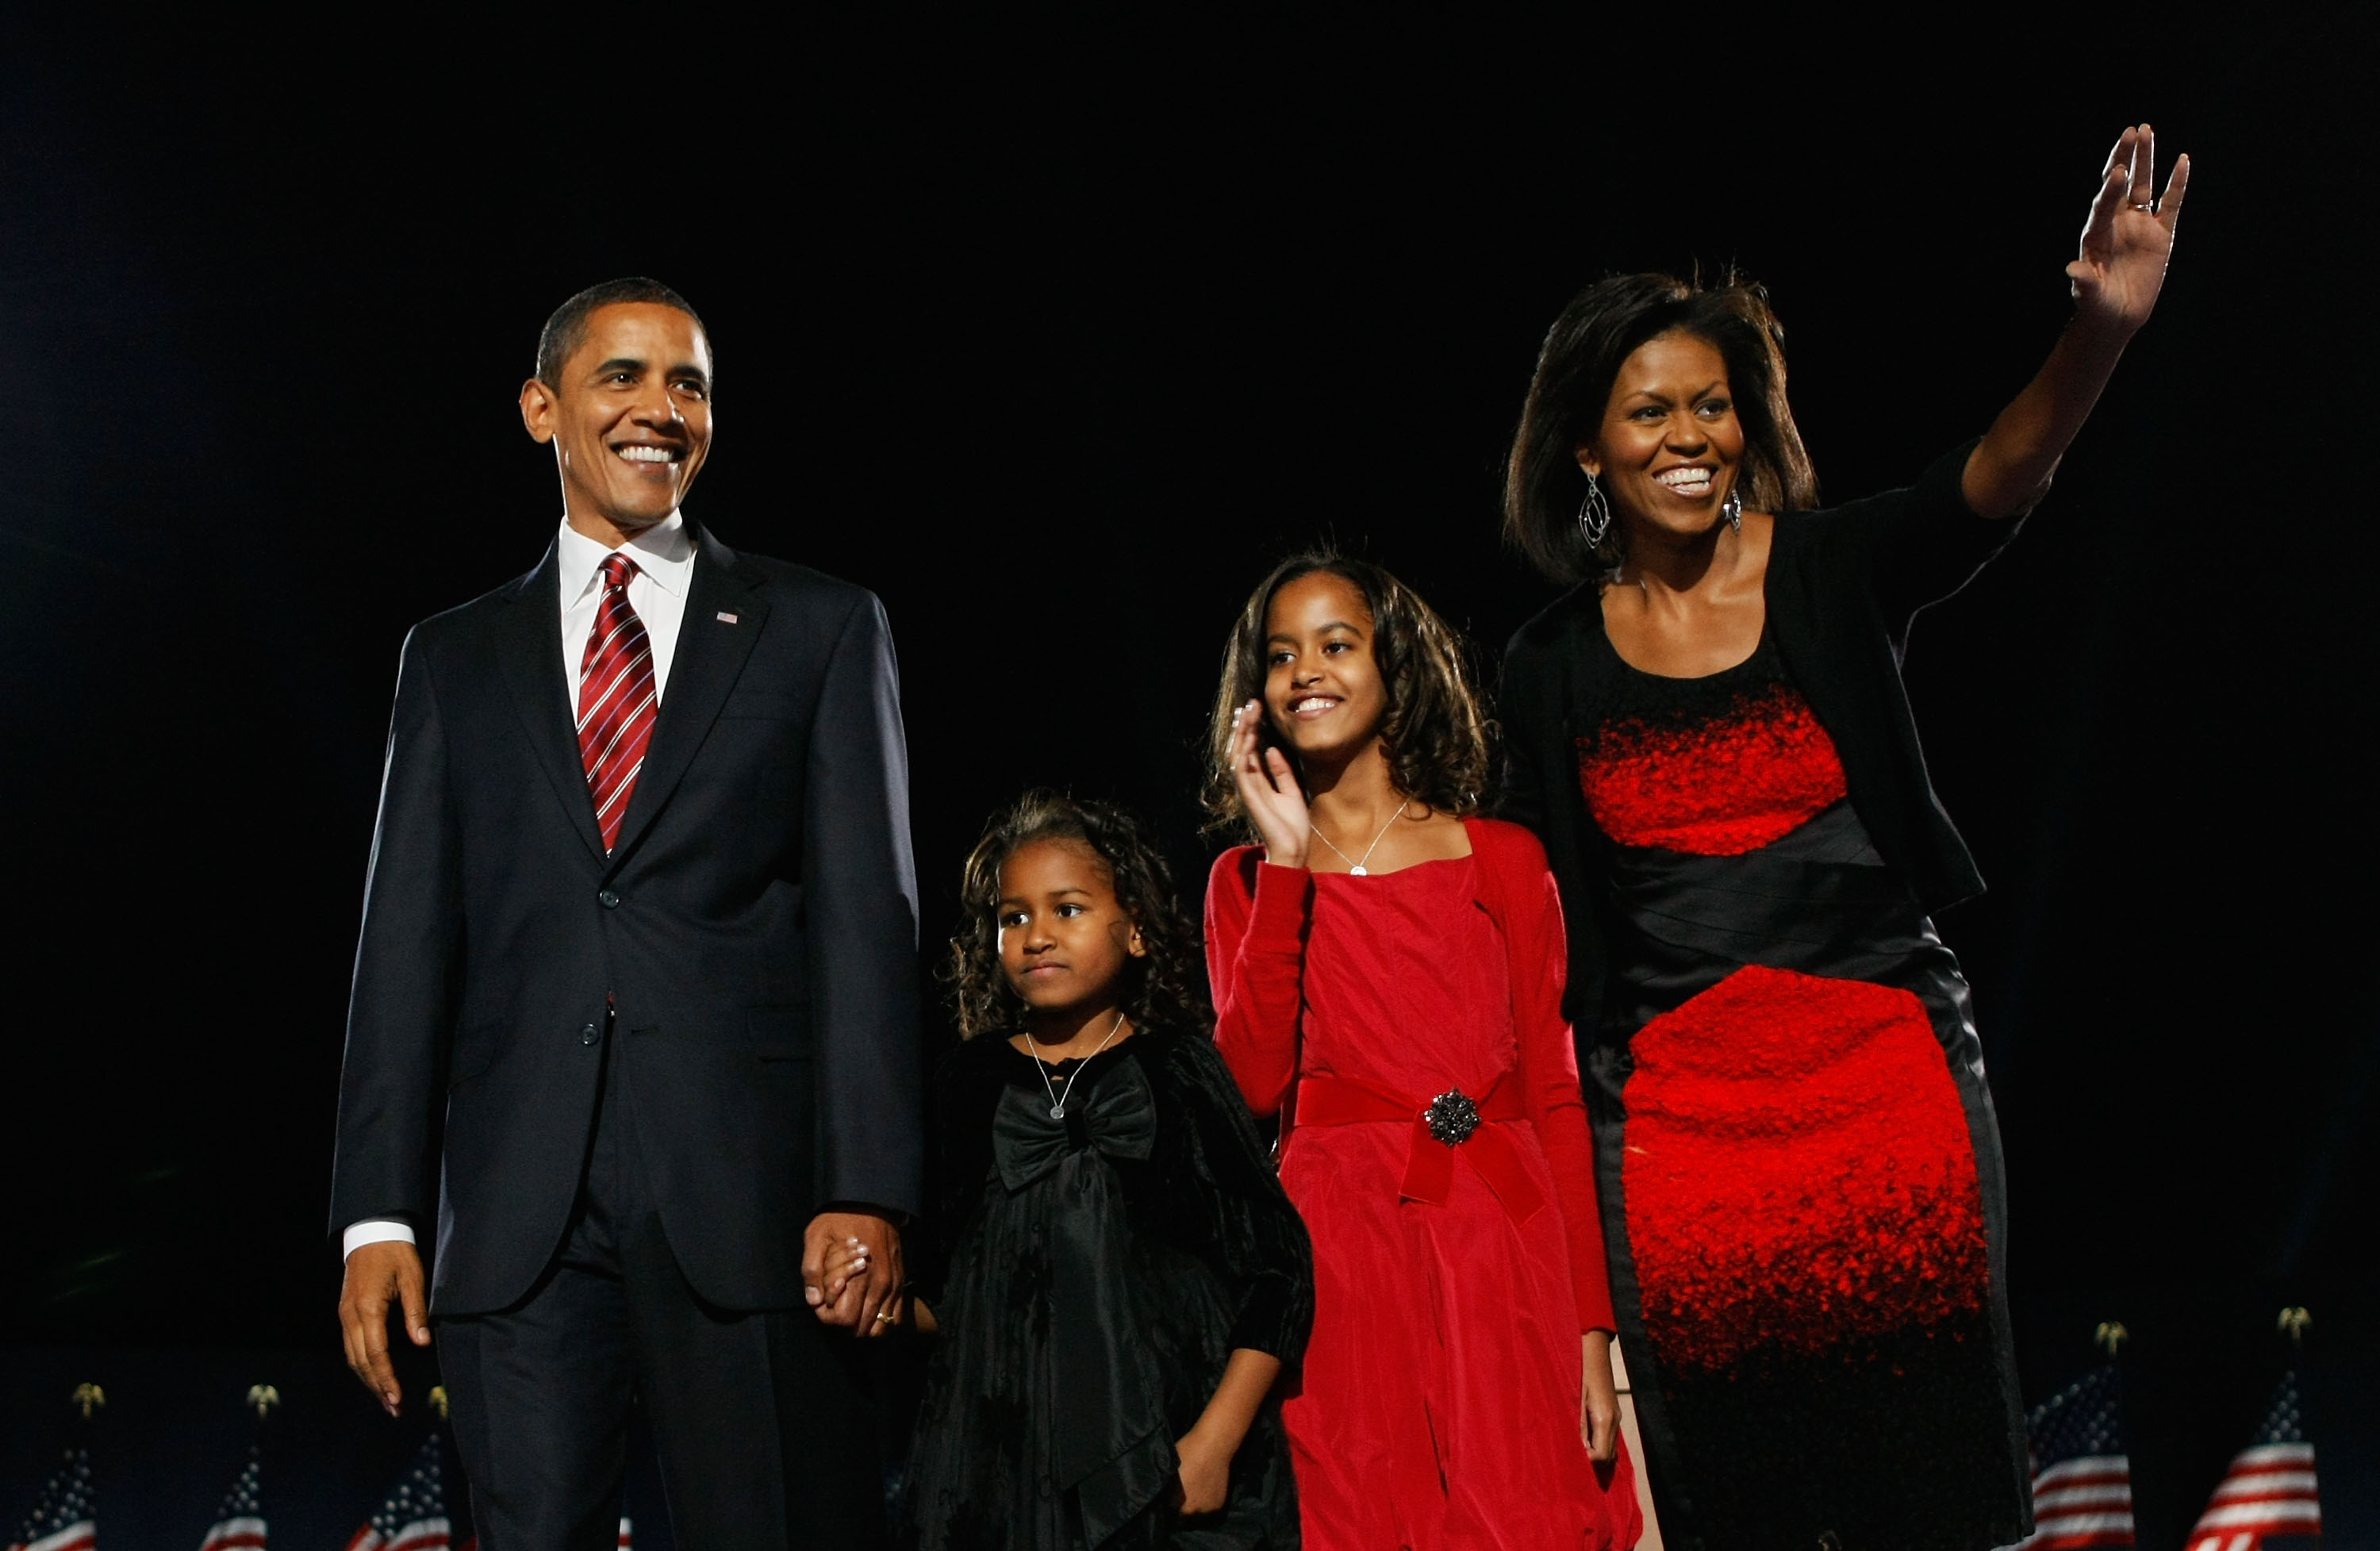 Barack, Sasha, Malia, and Michelle Obama during an election night gathering in Grant Park in Chicago, Illinois on November 4, 2008. | Source: Getty Images